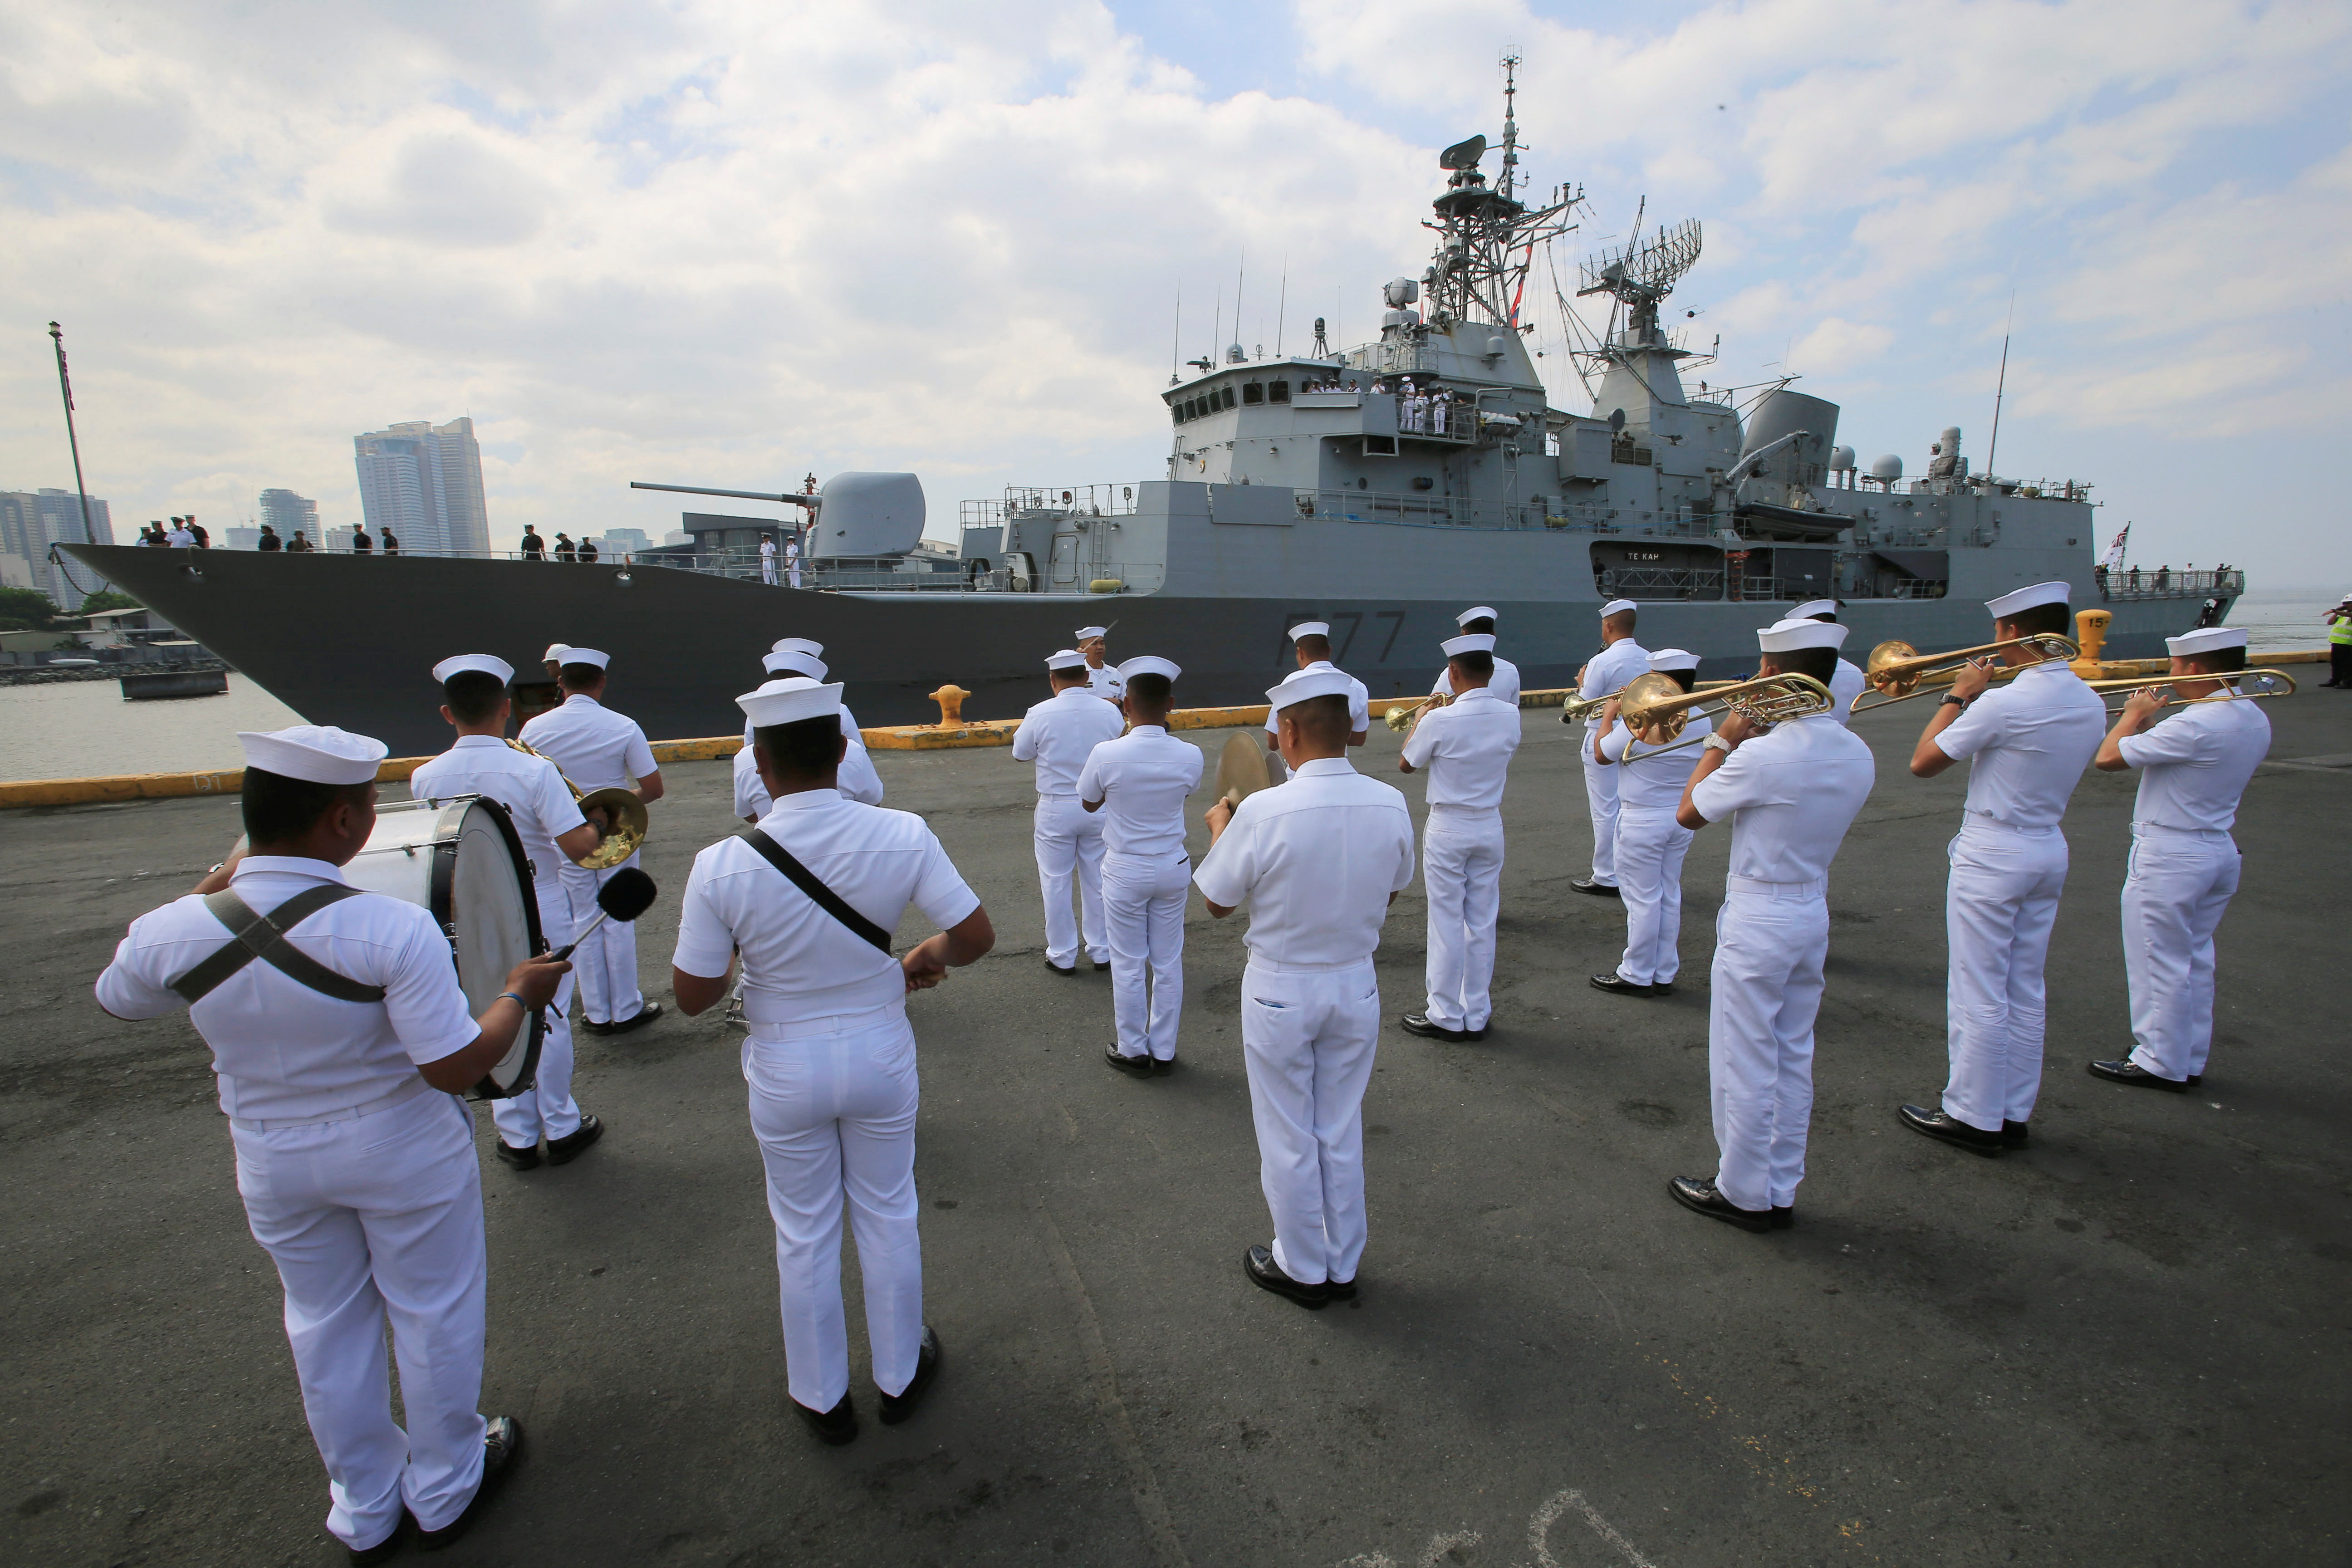 Philippine Navy band plays music to welcome the Royal New Zealand Navy frigate HMNZS Te Kaha (F77), upon arrival at the South Harbor, for a four-day goodwill visit in metro Manila